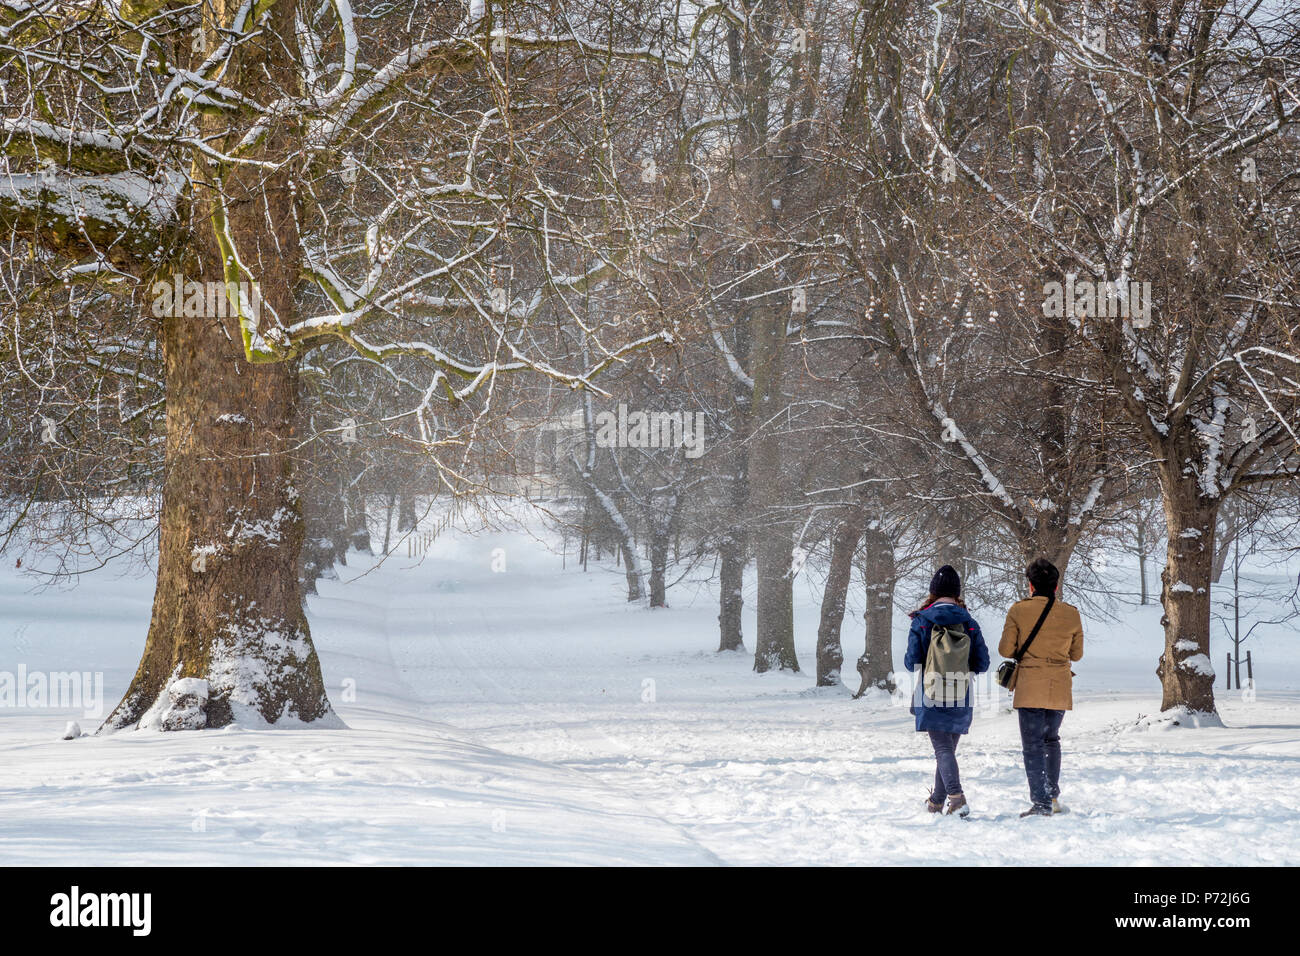 Green Park in the snow, London, England, United Kingdom, Europe Stock Photo